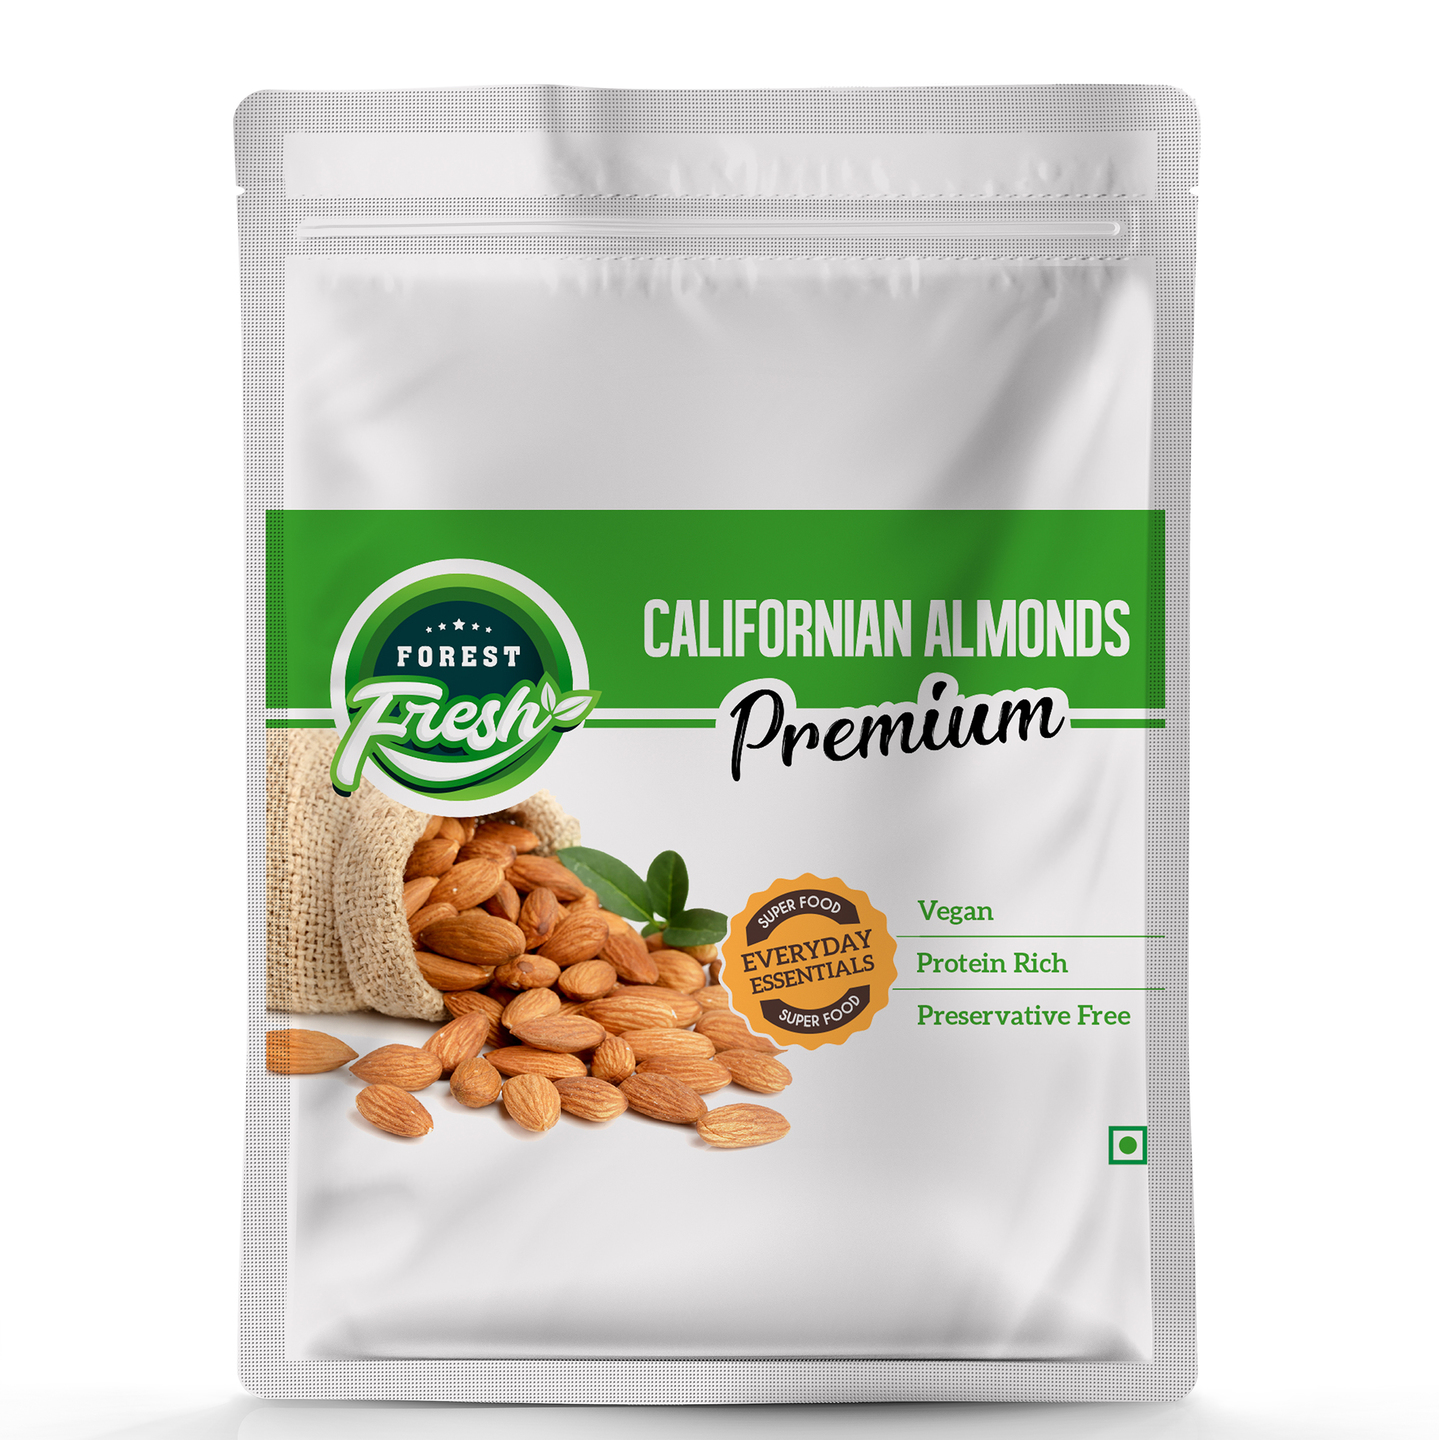 Forest Fresh 100 Natural - Premium California Almonds - Everyday Essential Superfood, 400g